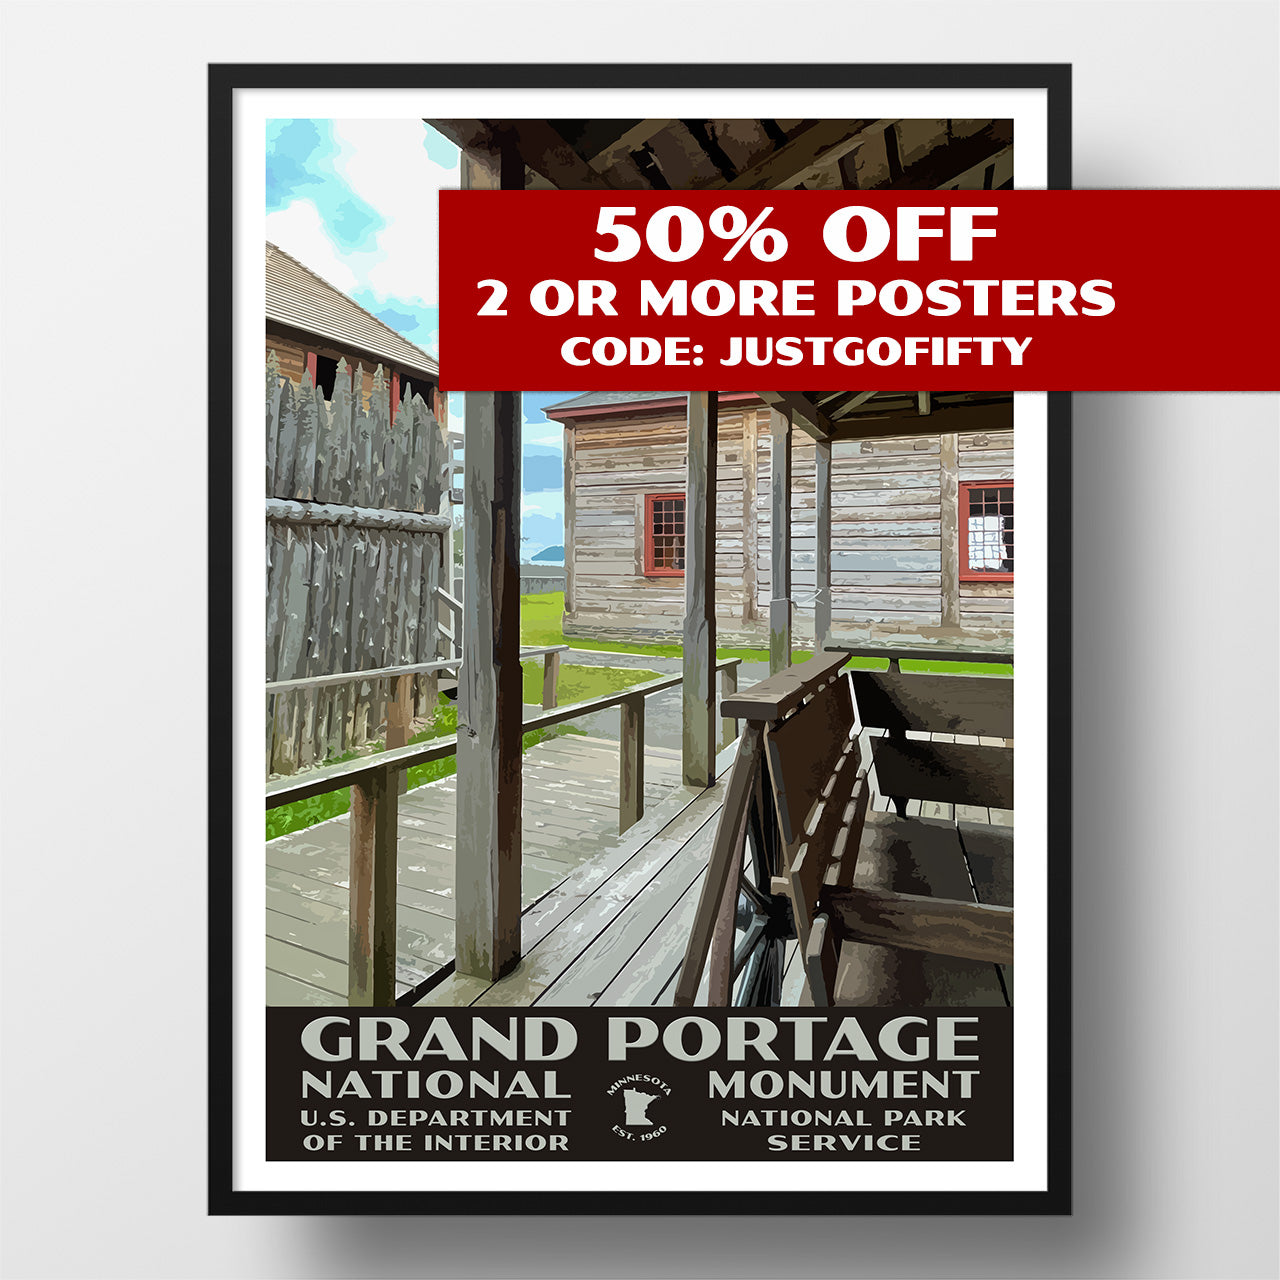 Grand Portage National Monument poster